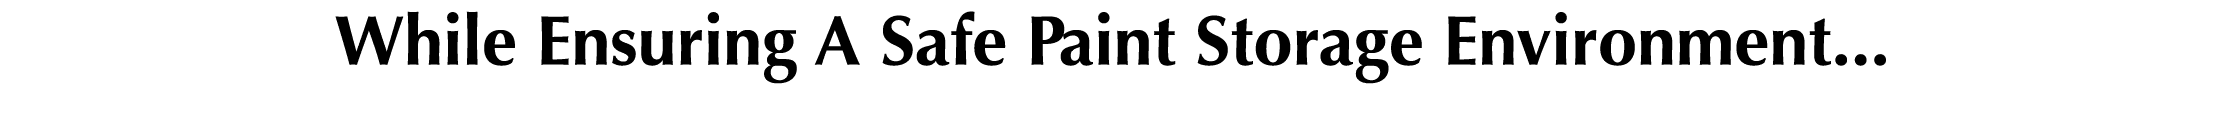 While Ensuring A Safe Paint Storage Environment   